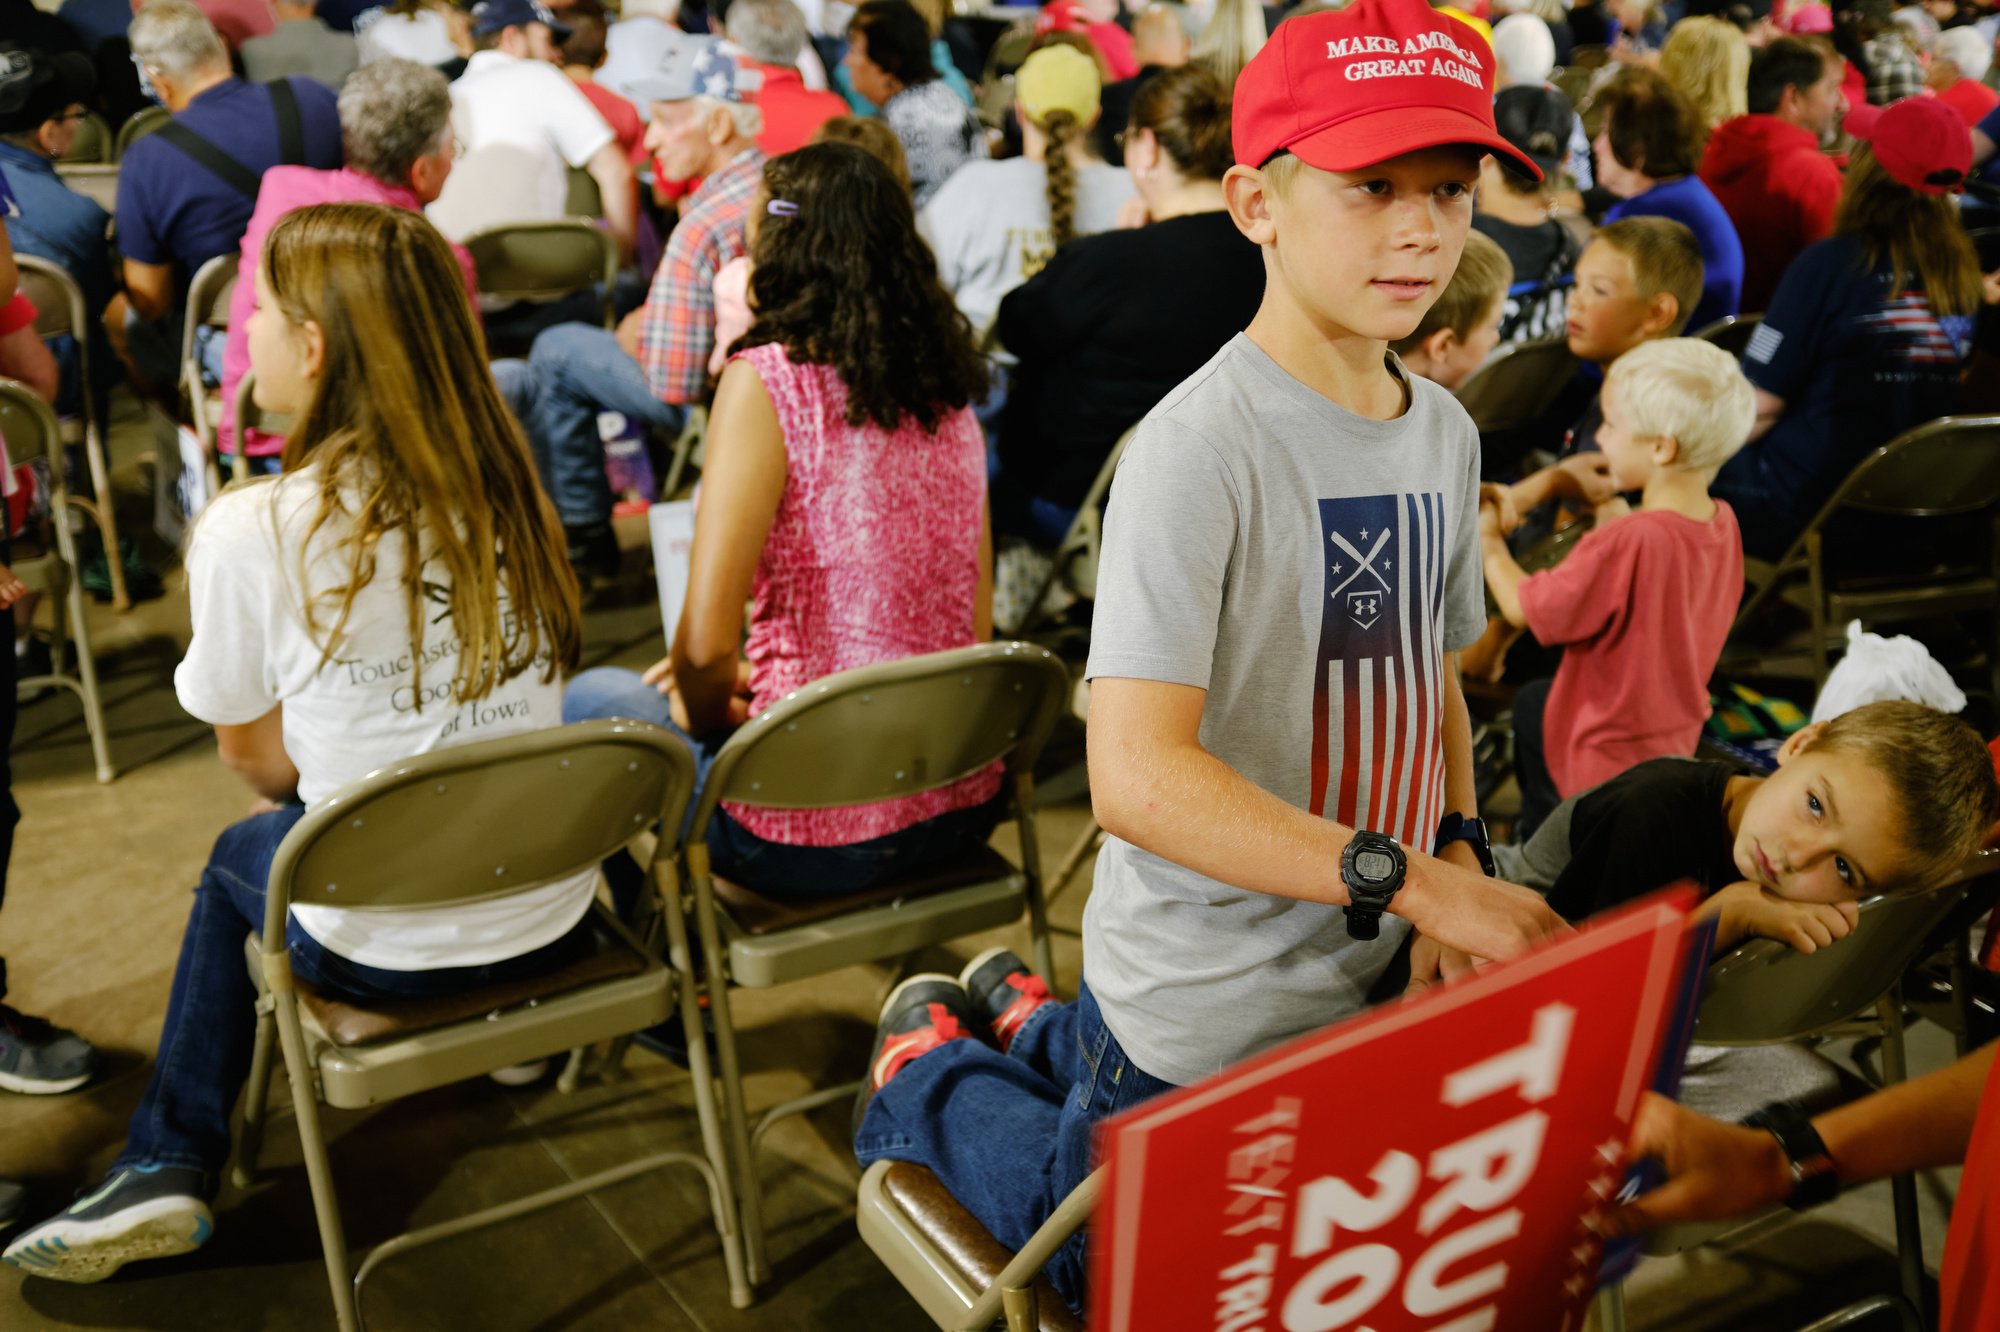  Children hold signs at the Team Trump Iowa Commit to Caucus Event at the Jackson County Fairgrounds in Maquoketa, IA on Sept. 20, 2023. (Mustafa Hussain for the New York Times) 